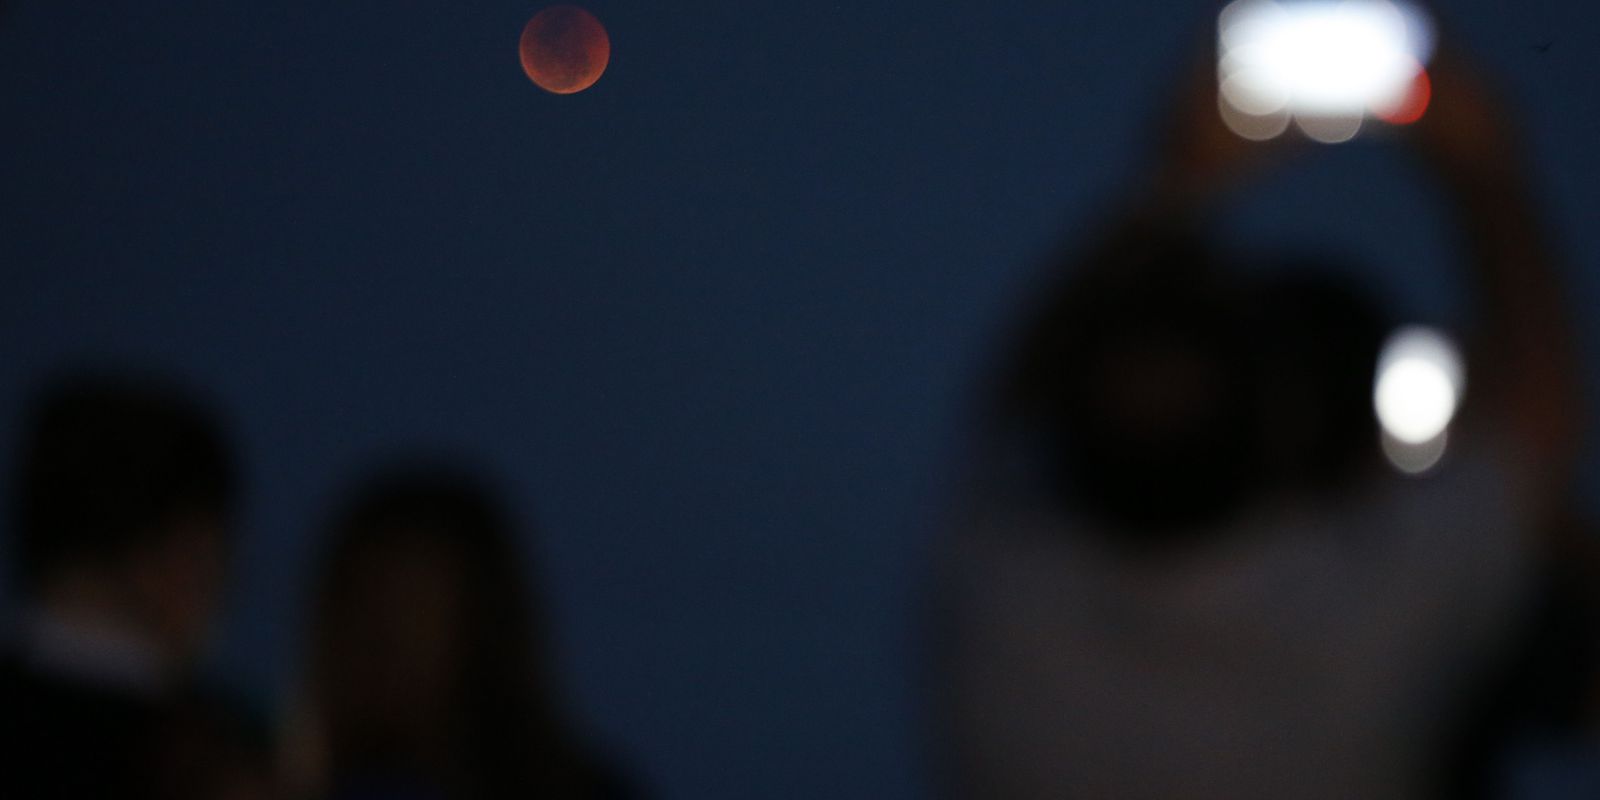 This weekend will have a “triply special” Blood Moon